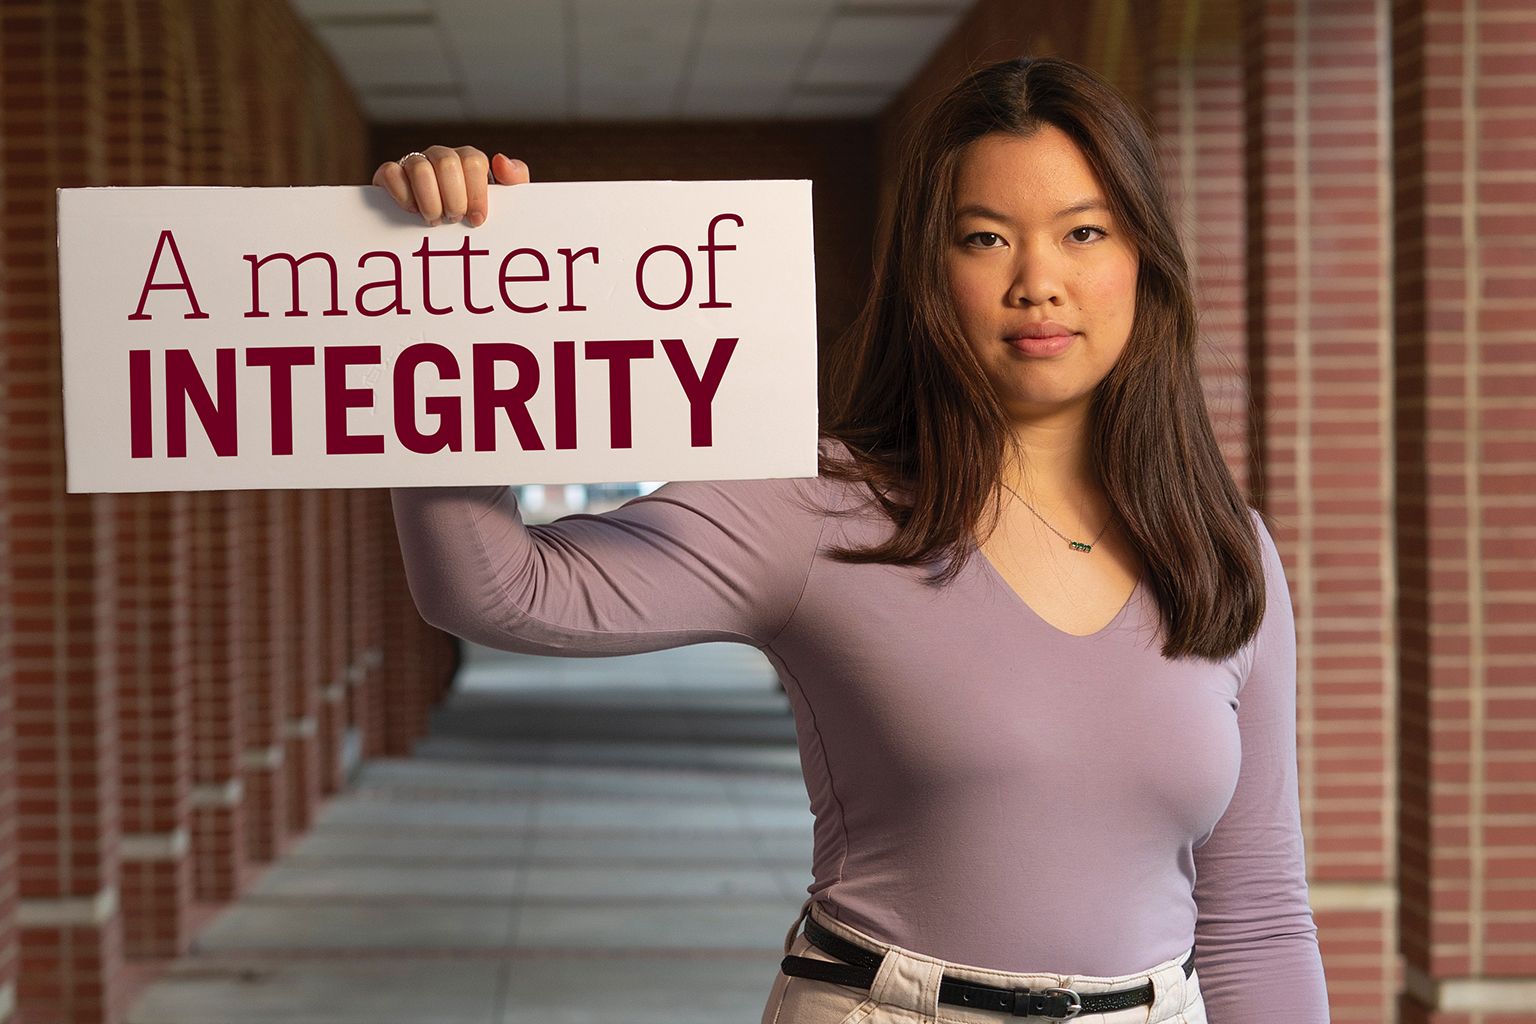 Xuan-Huyn stands in between brick colonnades holding a sign that says a matter of integrity.